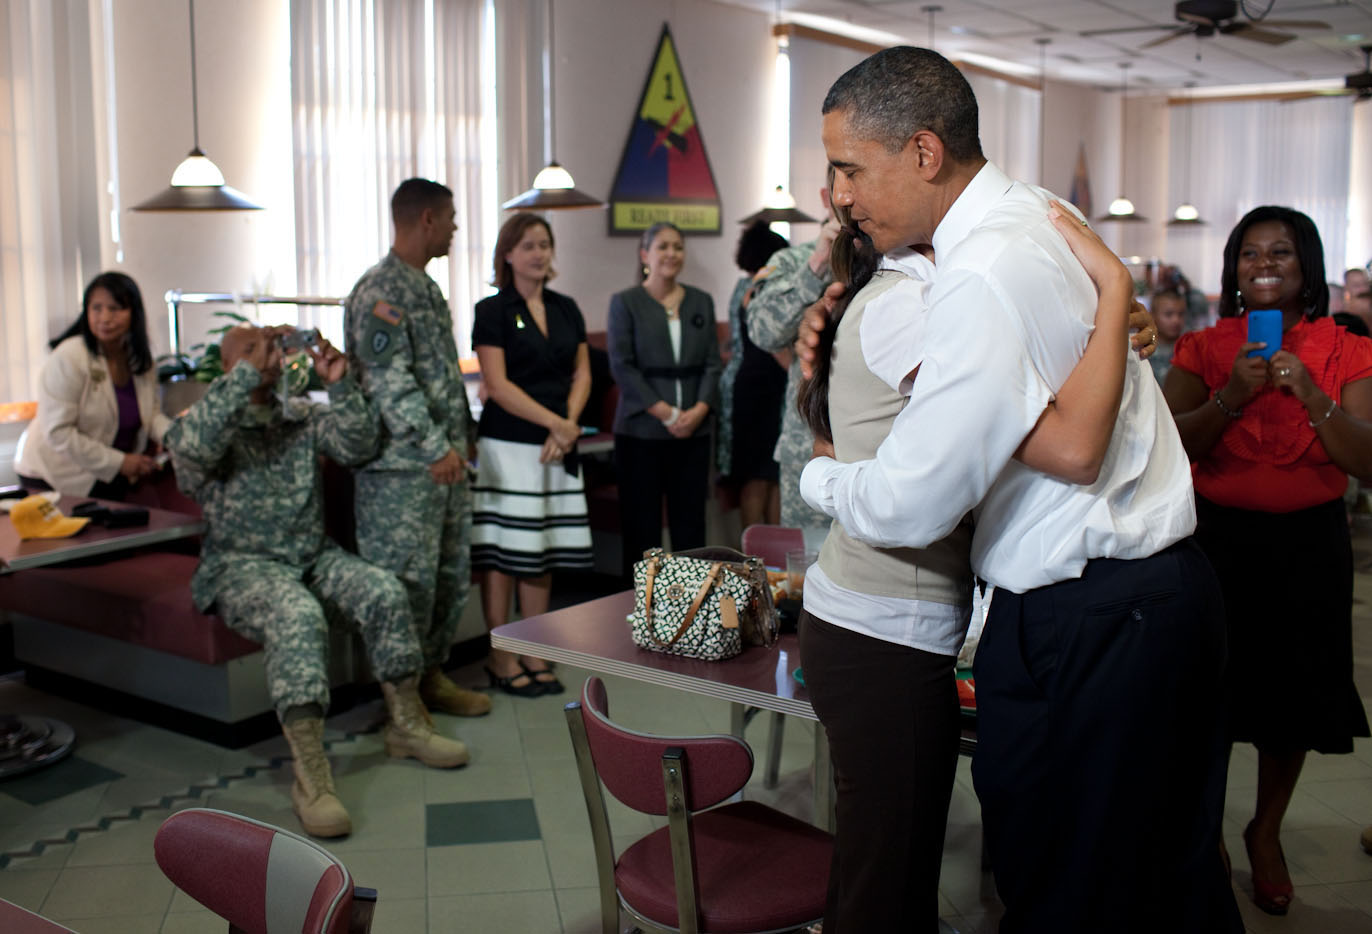 President Barack Obama Hugs a Woman as He Greets Members of the Military and Their Families at Fort Bliss in El Paso, Texas